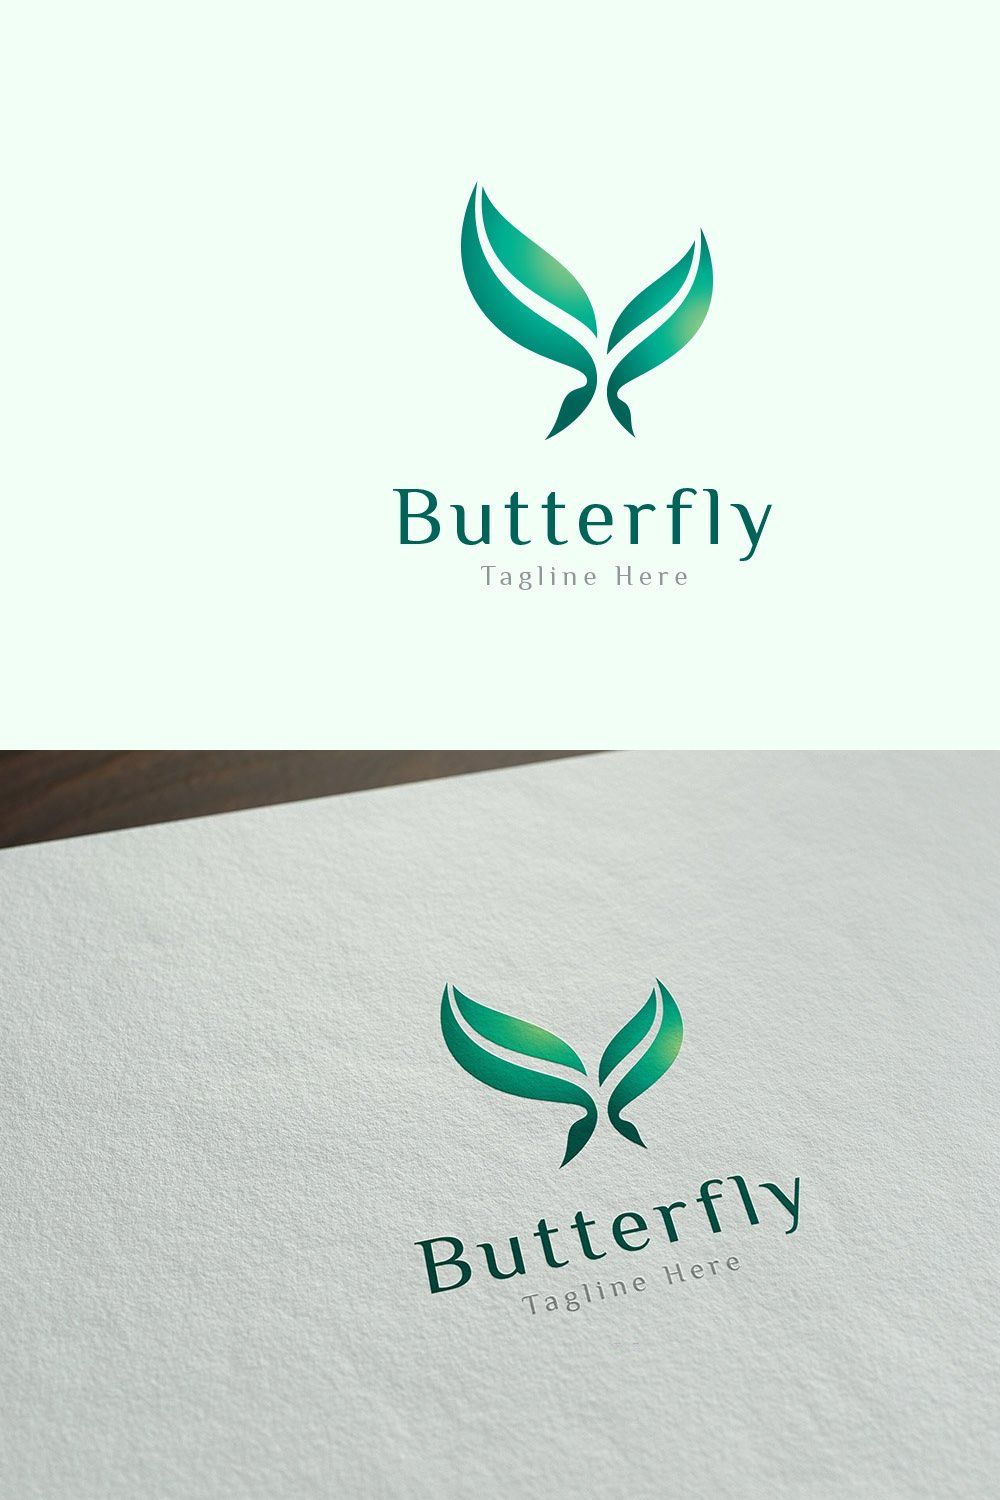 Butterfly pinterest preview image.